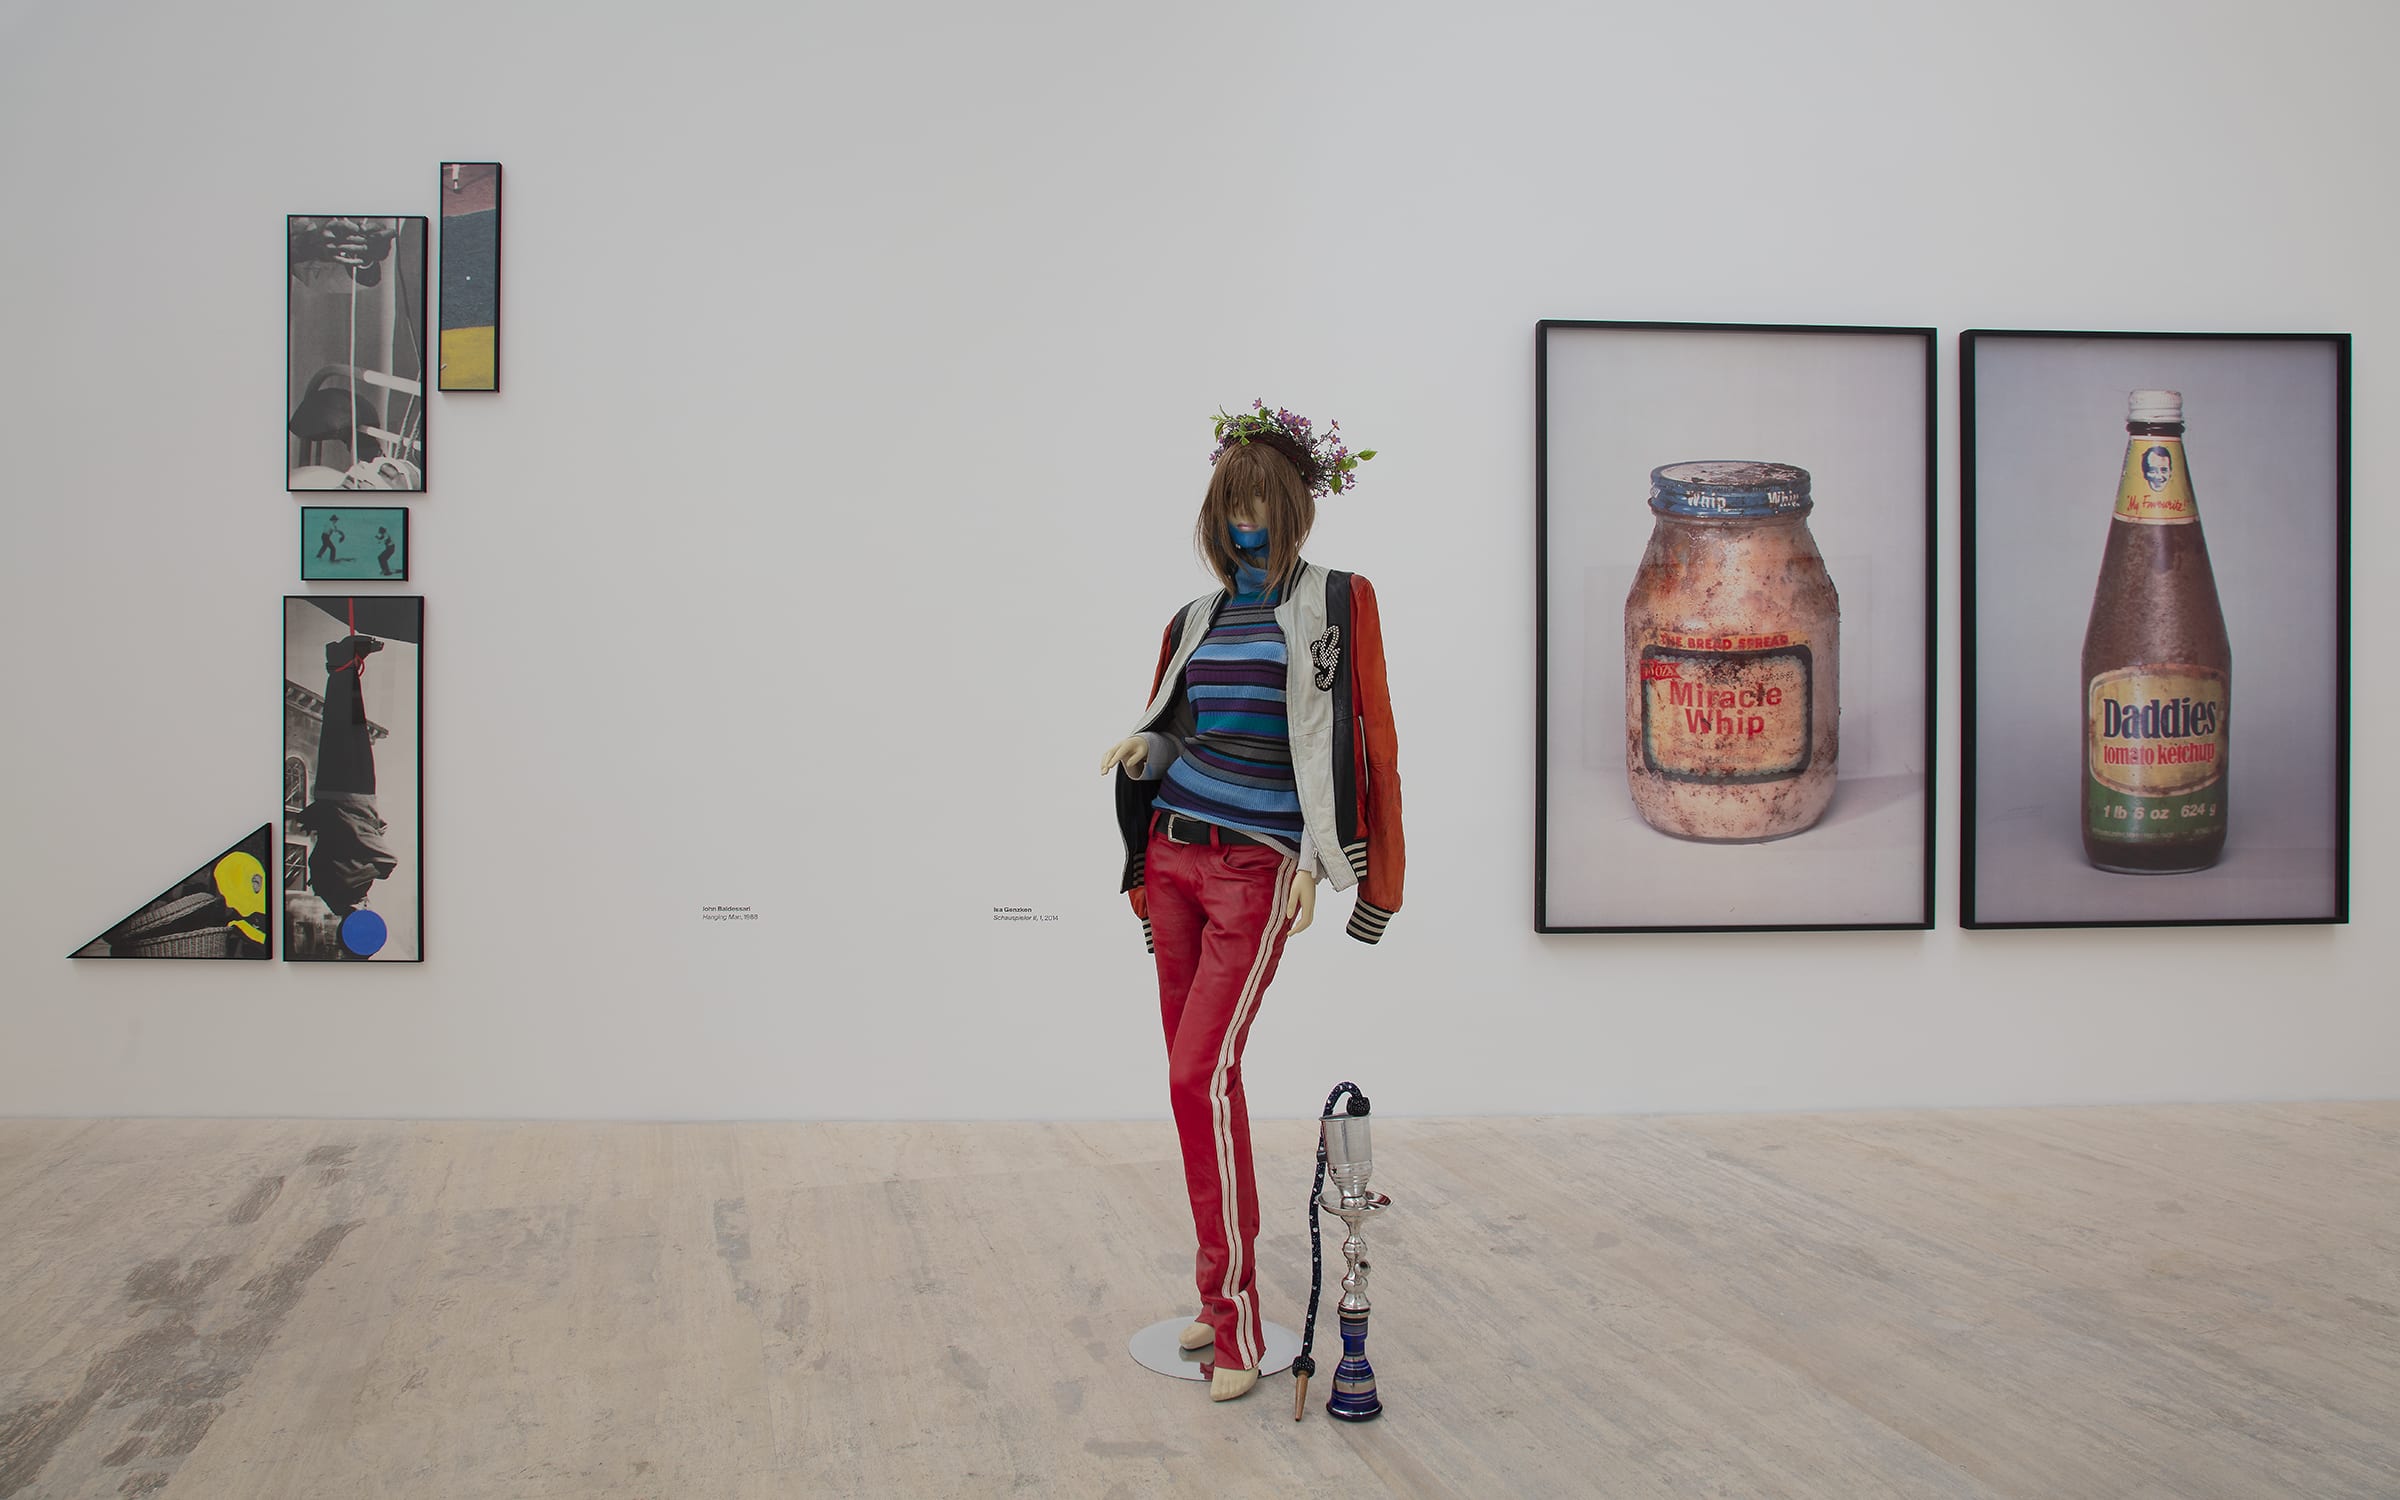 Installation view of the exhibition "Al filo de la navaja" - Colección Jumex Museo Jumex, Mexico City ,2020-2021. Courtesy of the Museo Jumex. Photograph by Francisco Kochen. Works on view : Paul McCarthy, Propo-Miracle Whip, 1992 / Propo-Daddies Ketchup, 1992. Courtesy of the artist and Hauser & Wirth. Isa Genzken : Schauspieler II, 1, 2014. Courtesy of the artist and Galerie Buchholz. © Isa Genzken / VG-Bild Kunst / SOMAAP/ México / 2020. John Baldessari, Hanging Man, 1988. Courtesy of The Estate of John Baldessari.